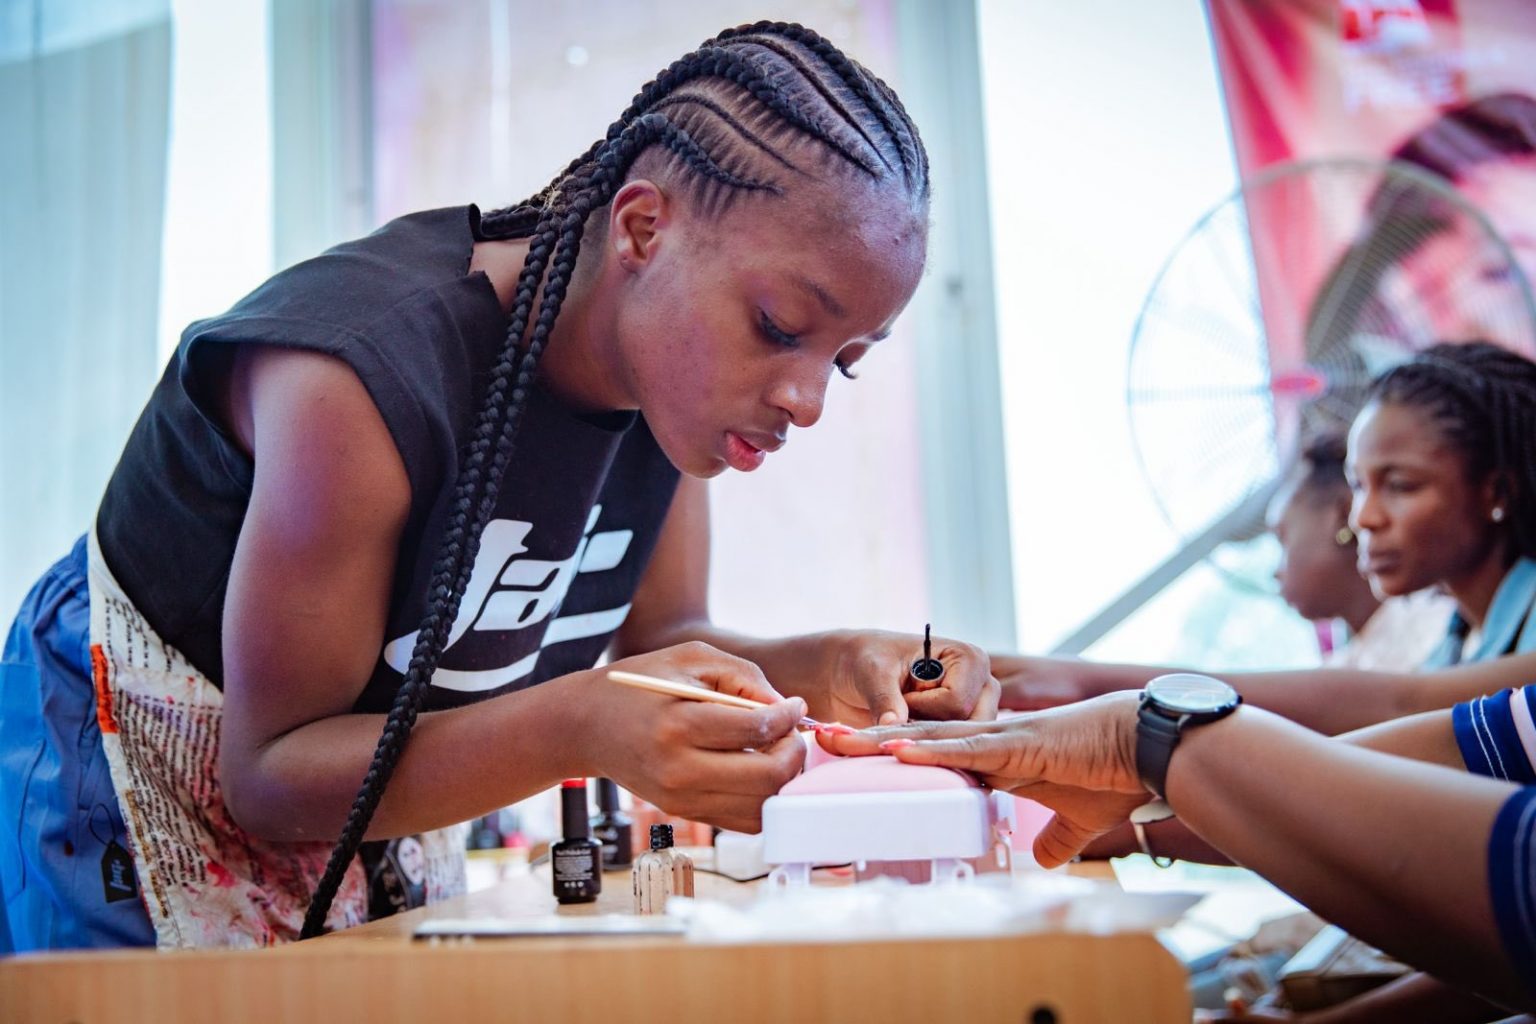 (PHOTOS) GUINNESS WORLD RECORD NIGERIAN LADY COMPLETES 72HOUR NAIL PAINTING MARATHON IN